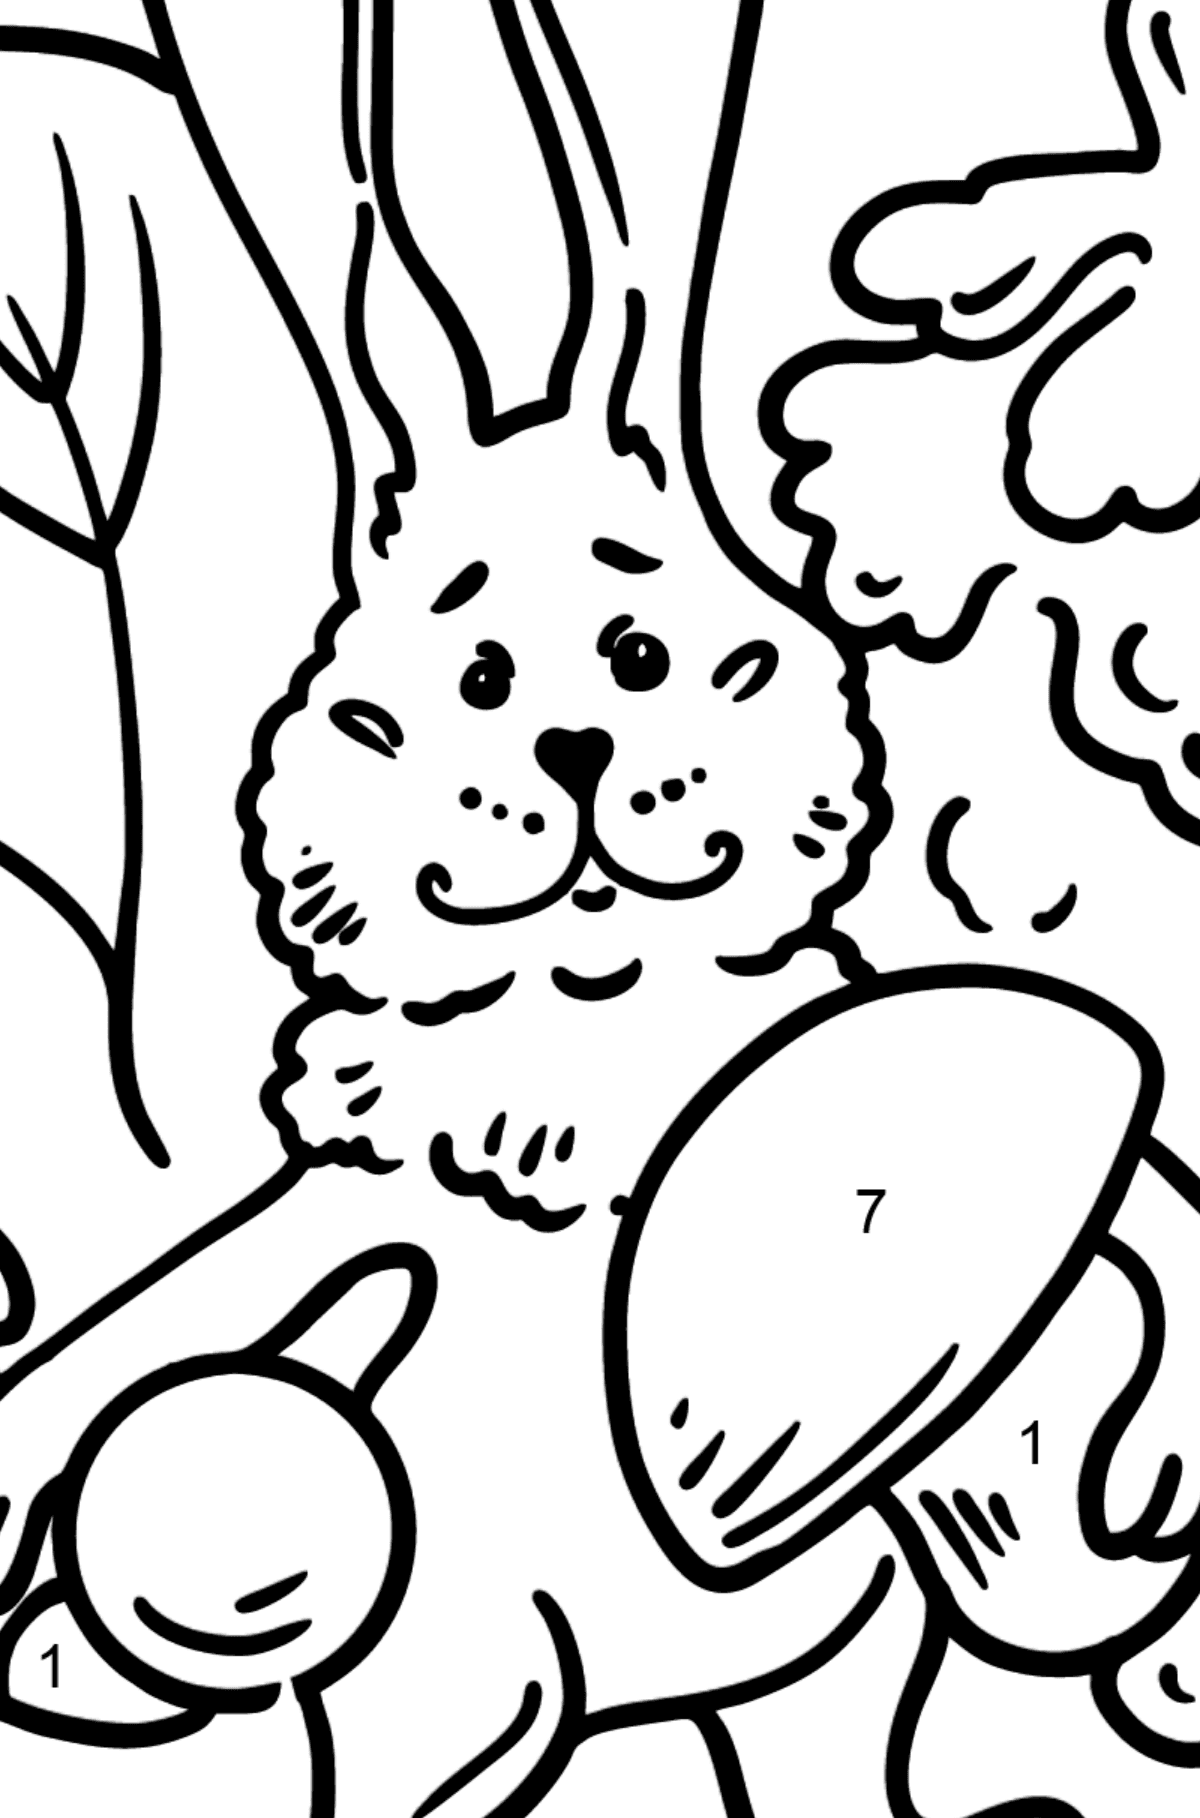 Bunny in the Forest coloring page - Coloring by Numbers for Kids